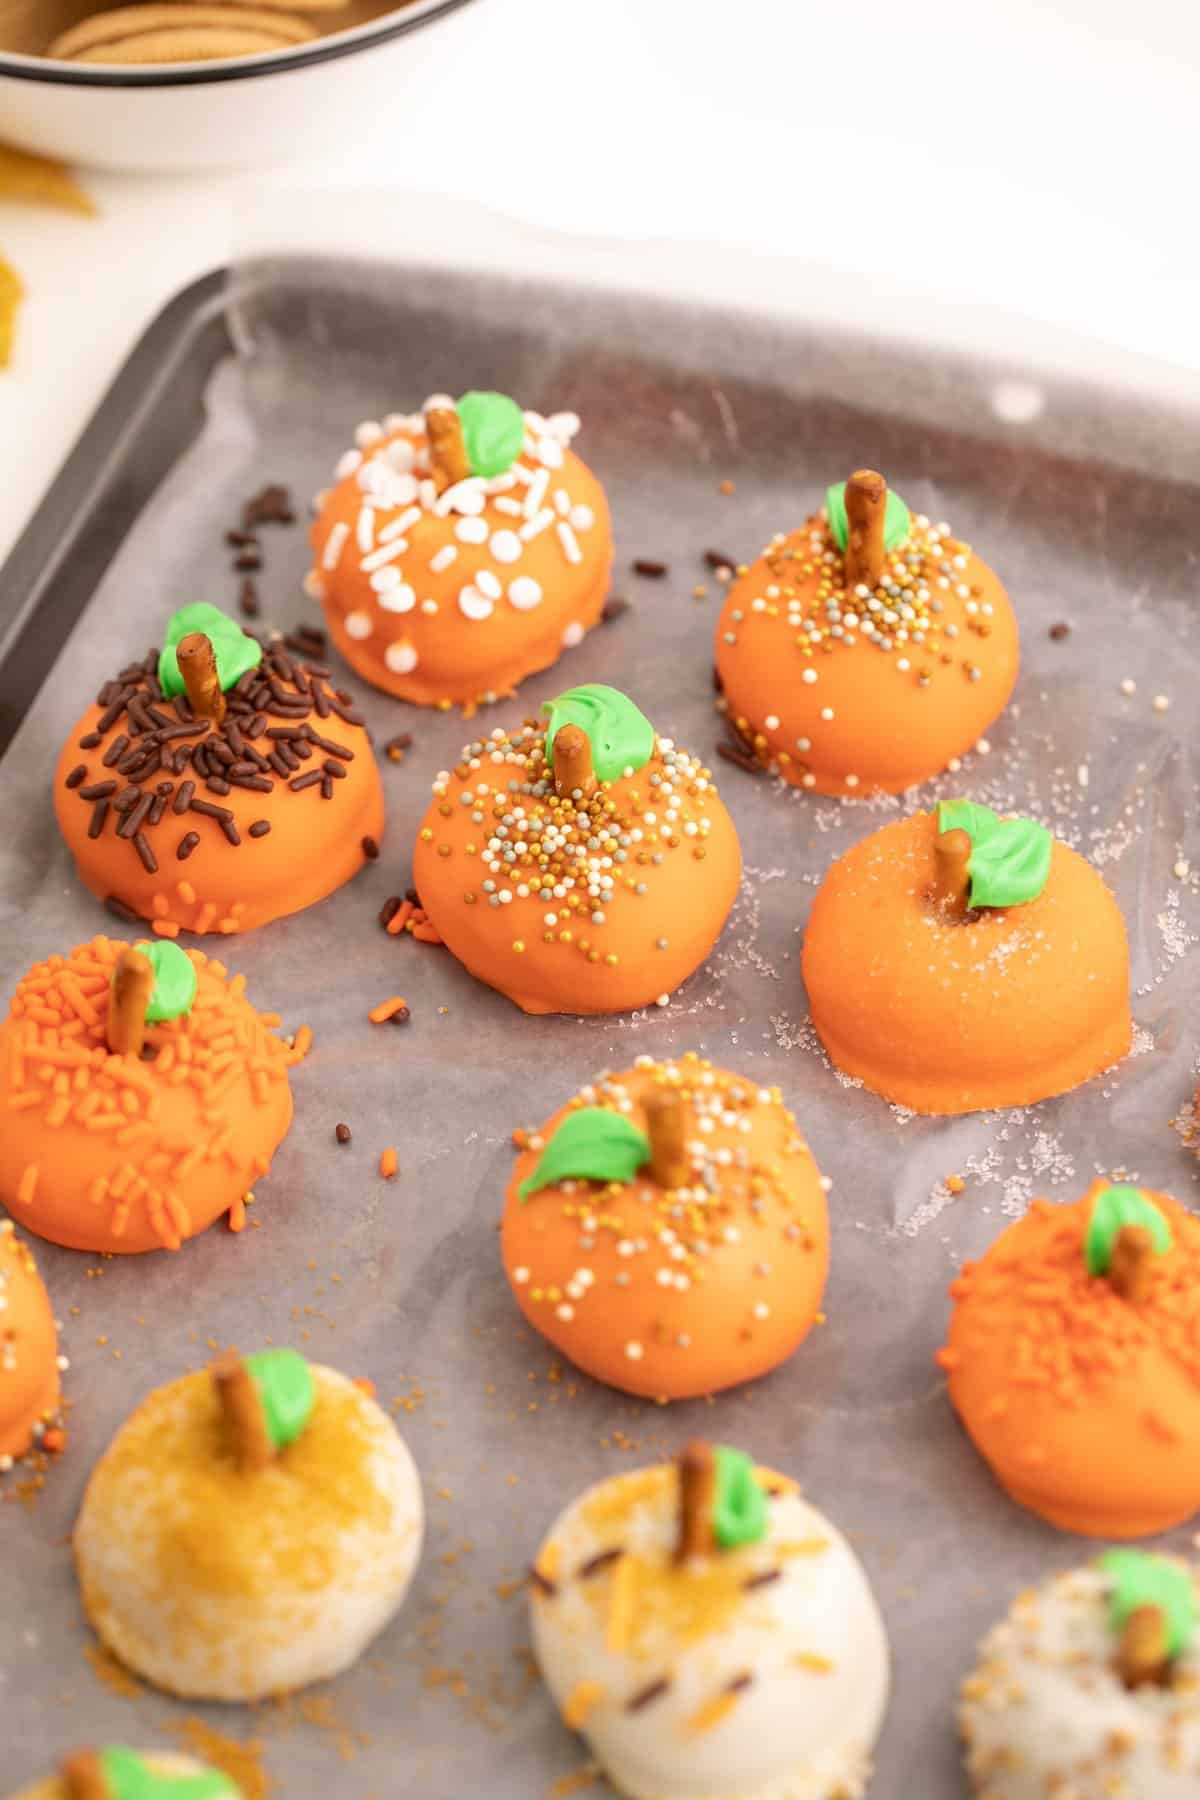 Orange and white oreo truffles with the green leaves and sprinkles on cookie sheet. 